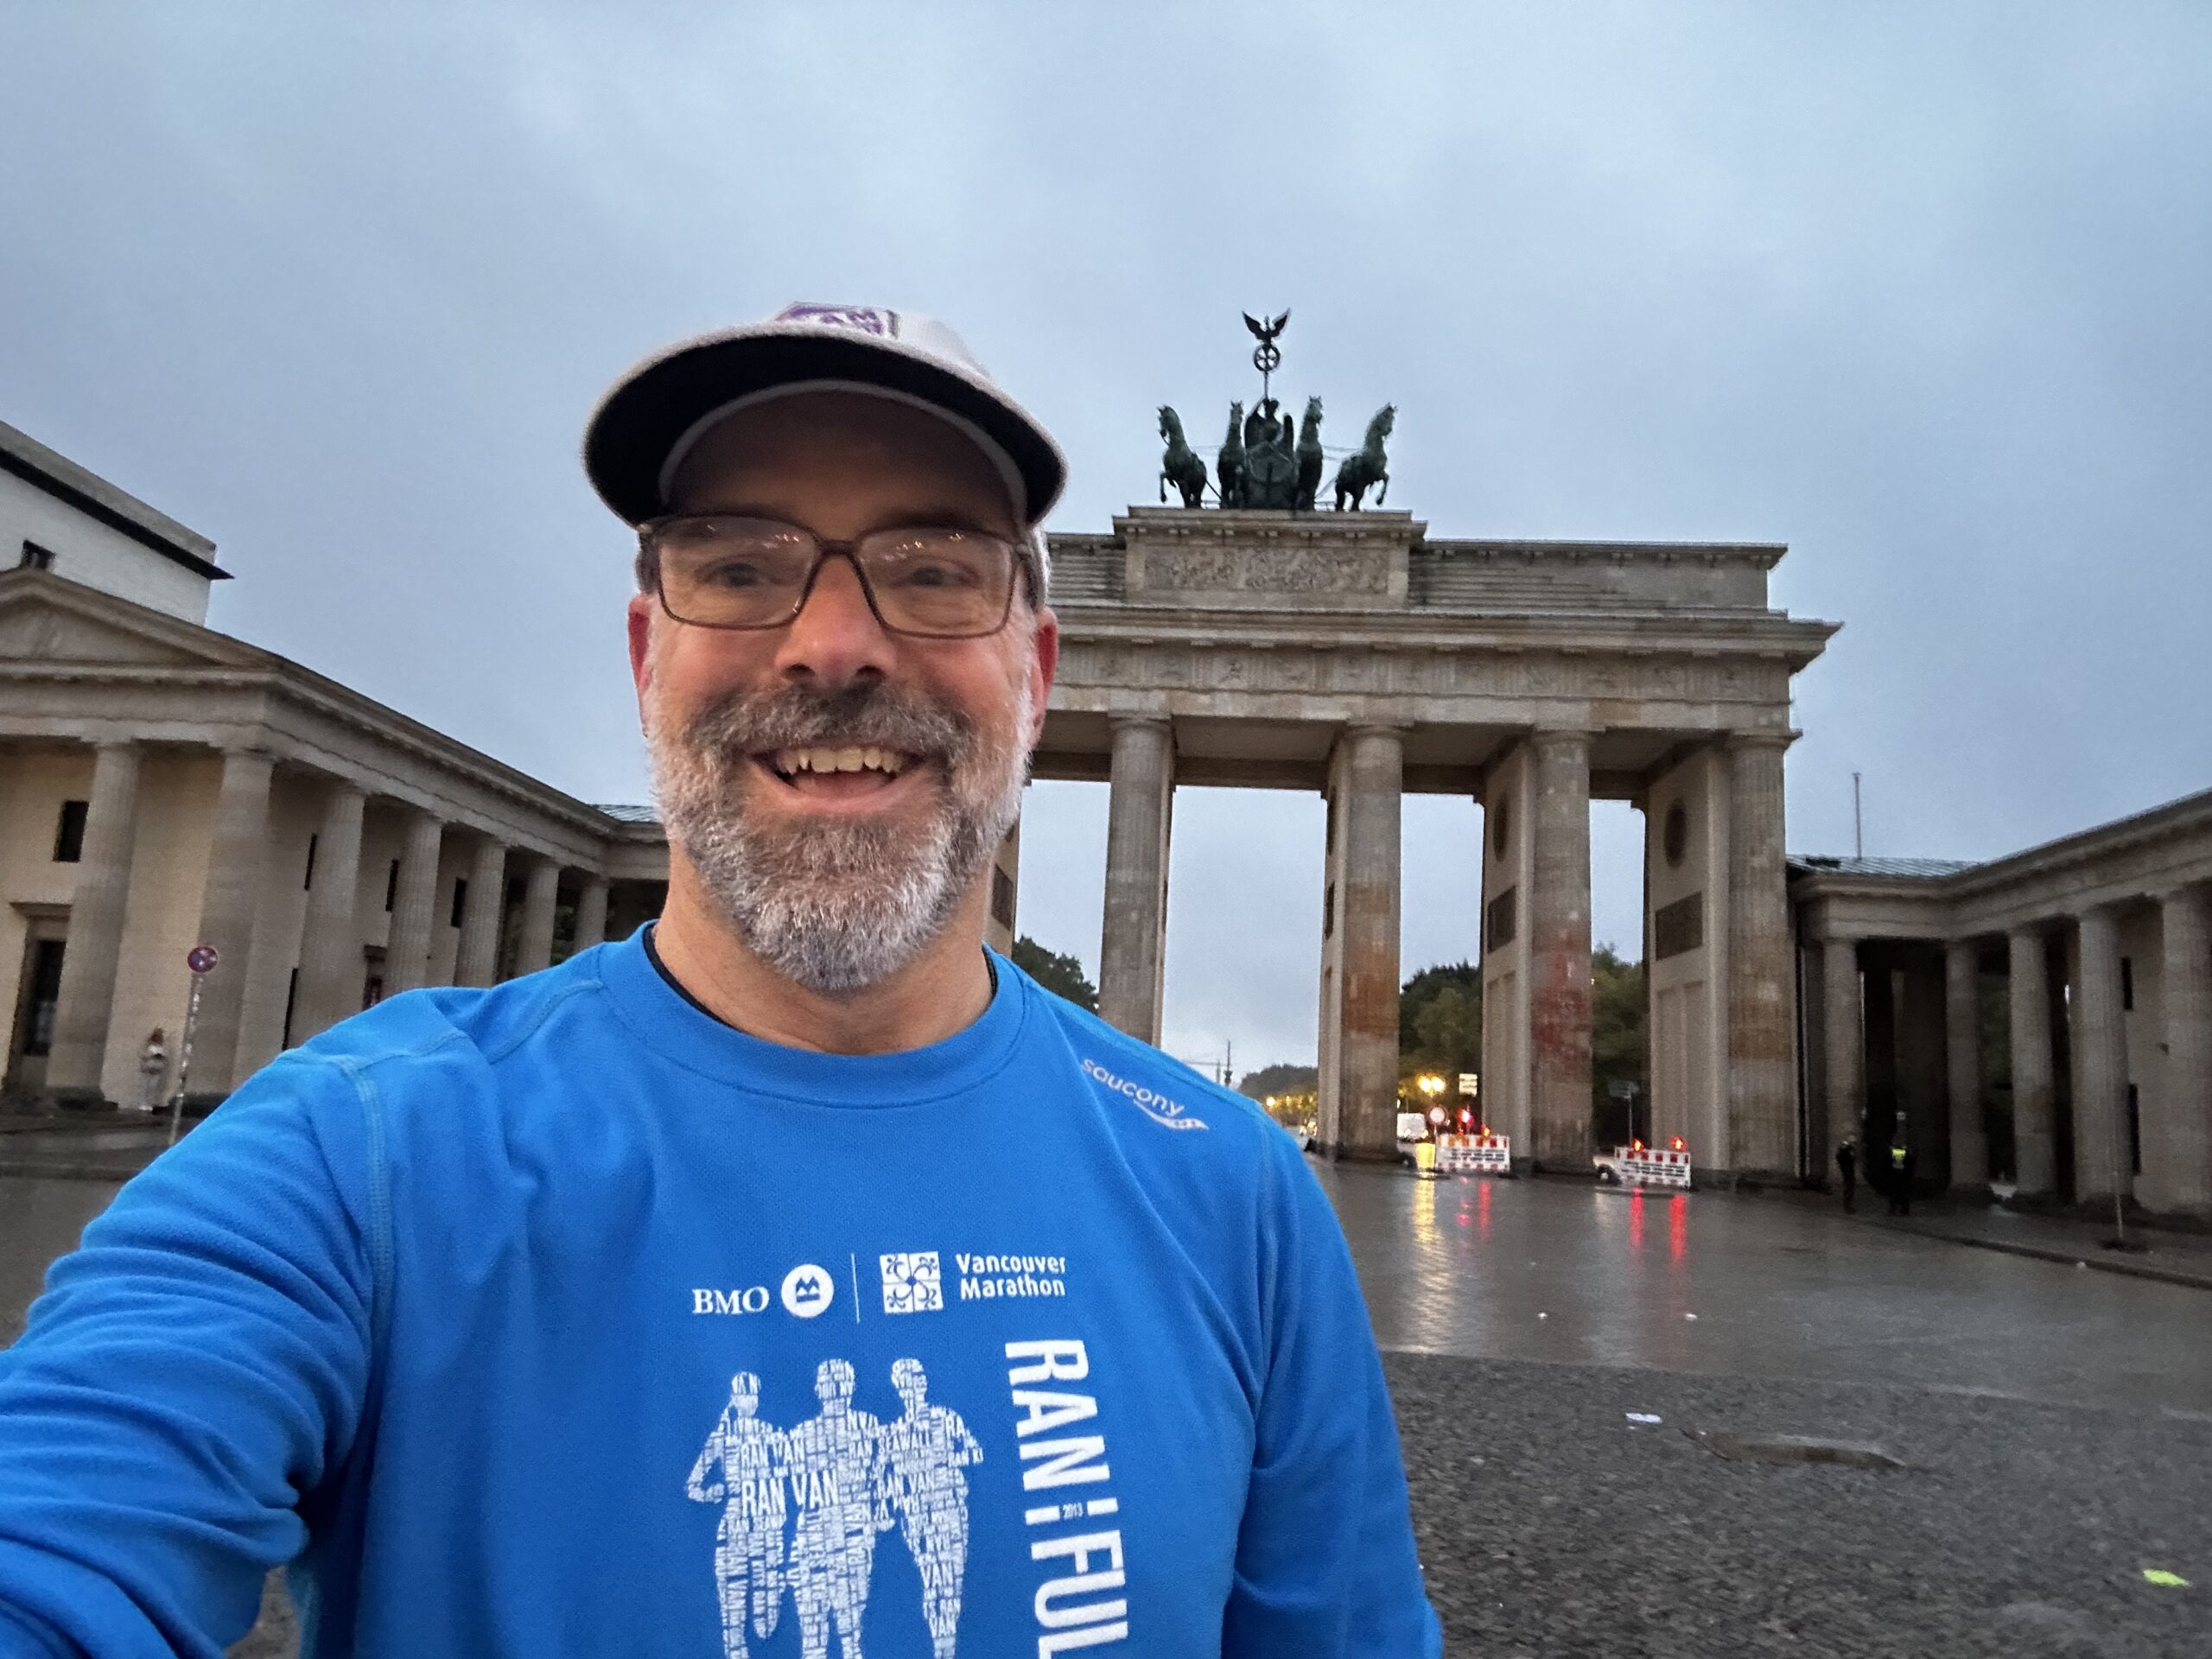 a man in running gear stands in front of the brandenburg gate in Berlin Germany